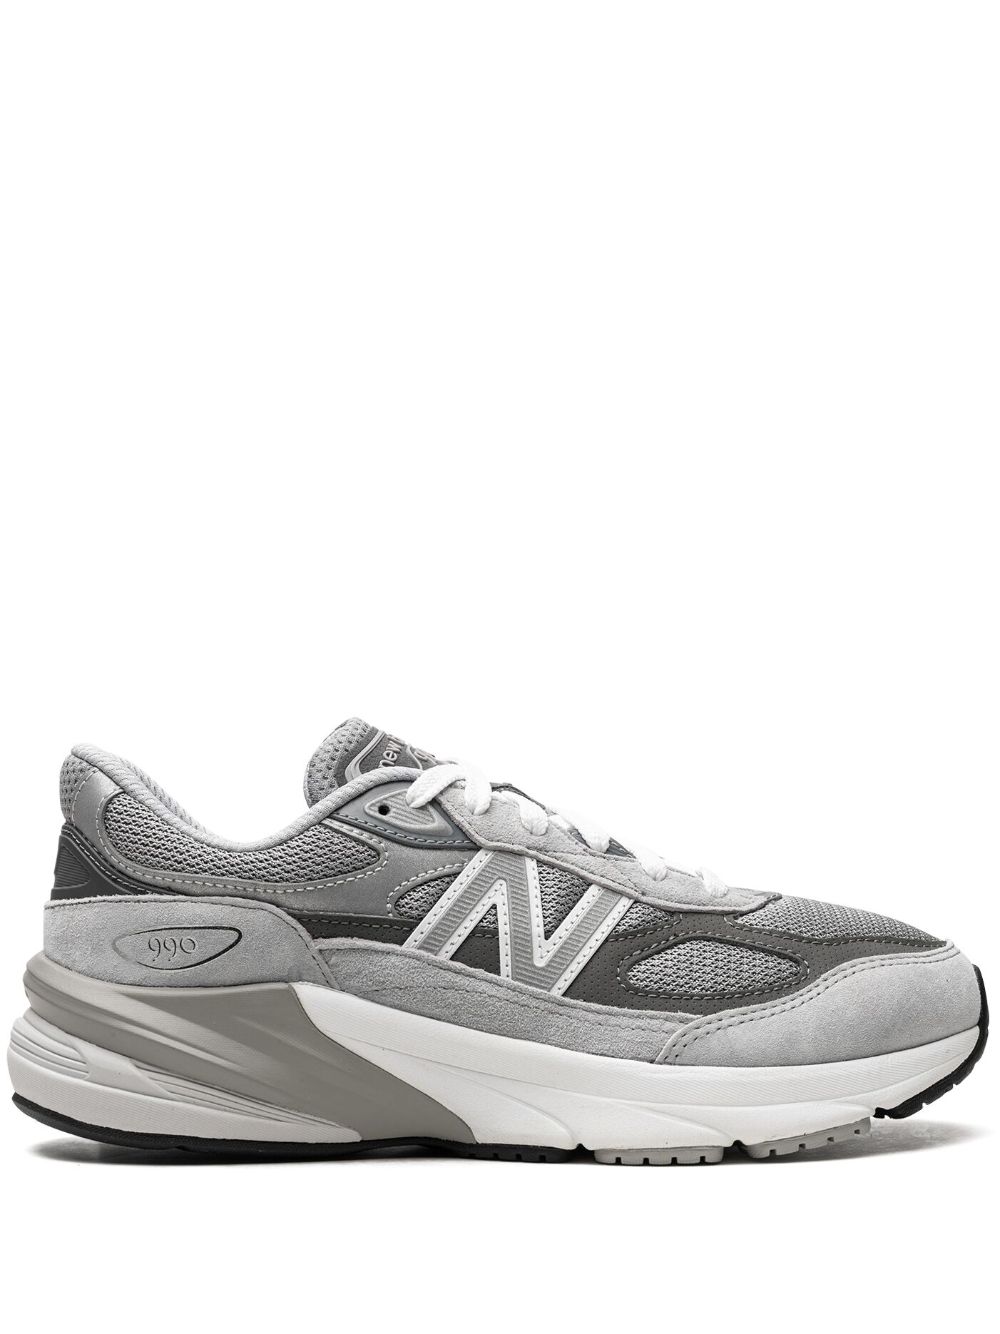 New Balance Fuelcell 990v6 "grey" Trainers